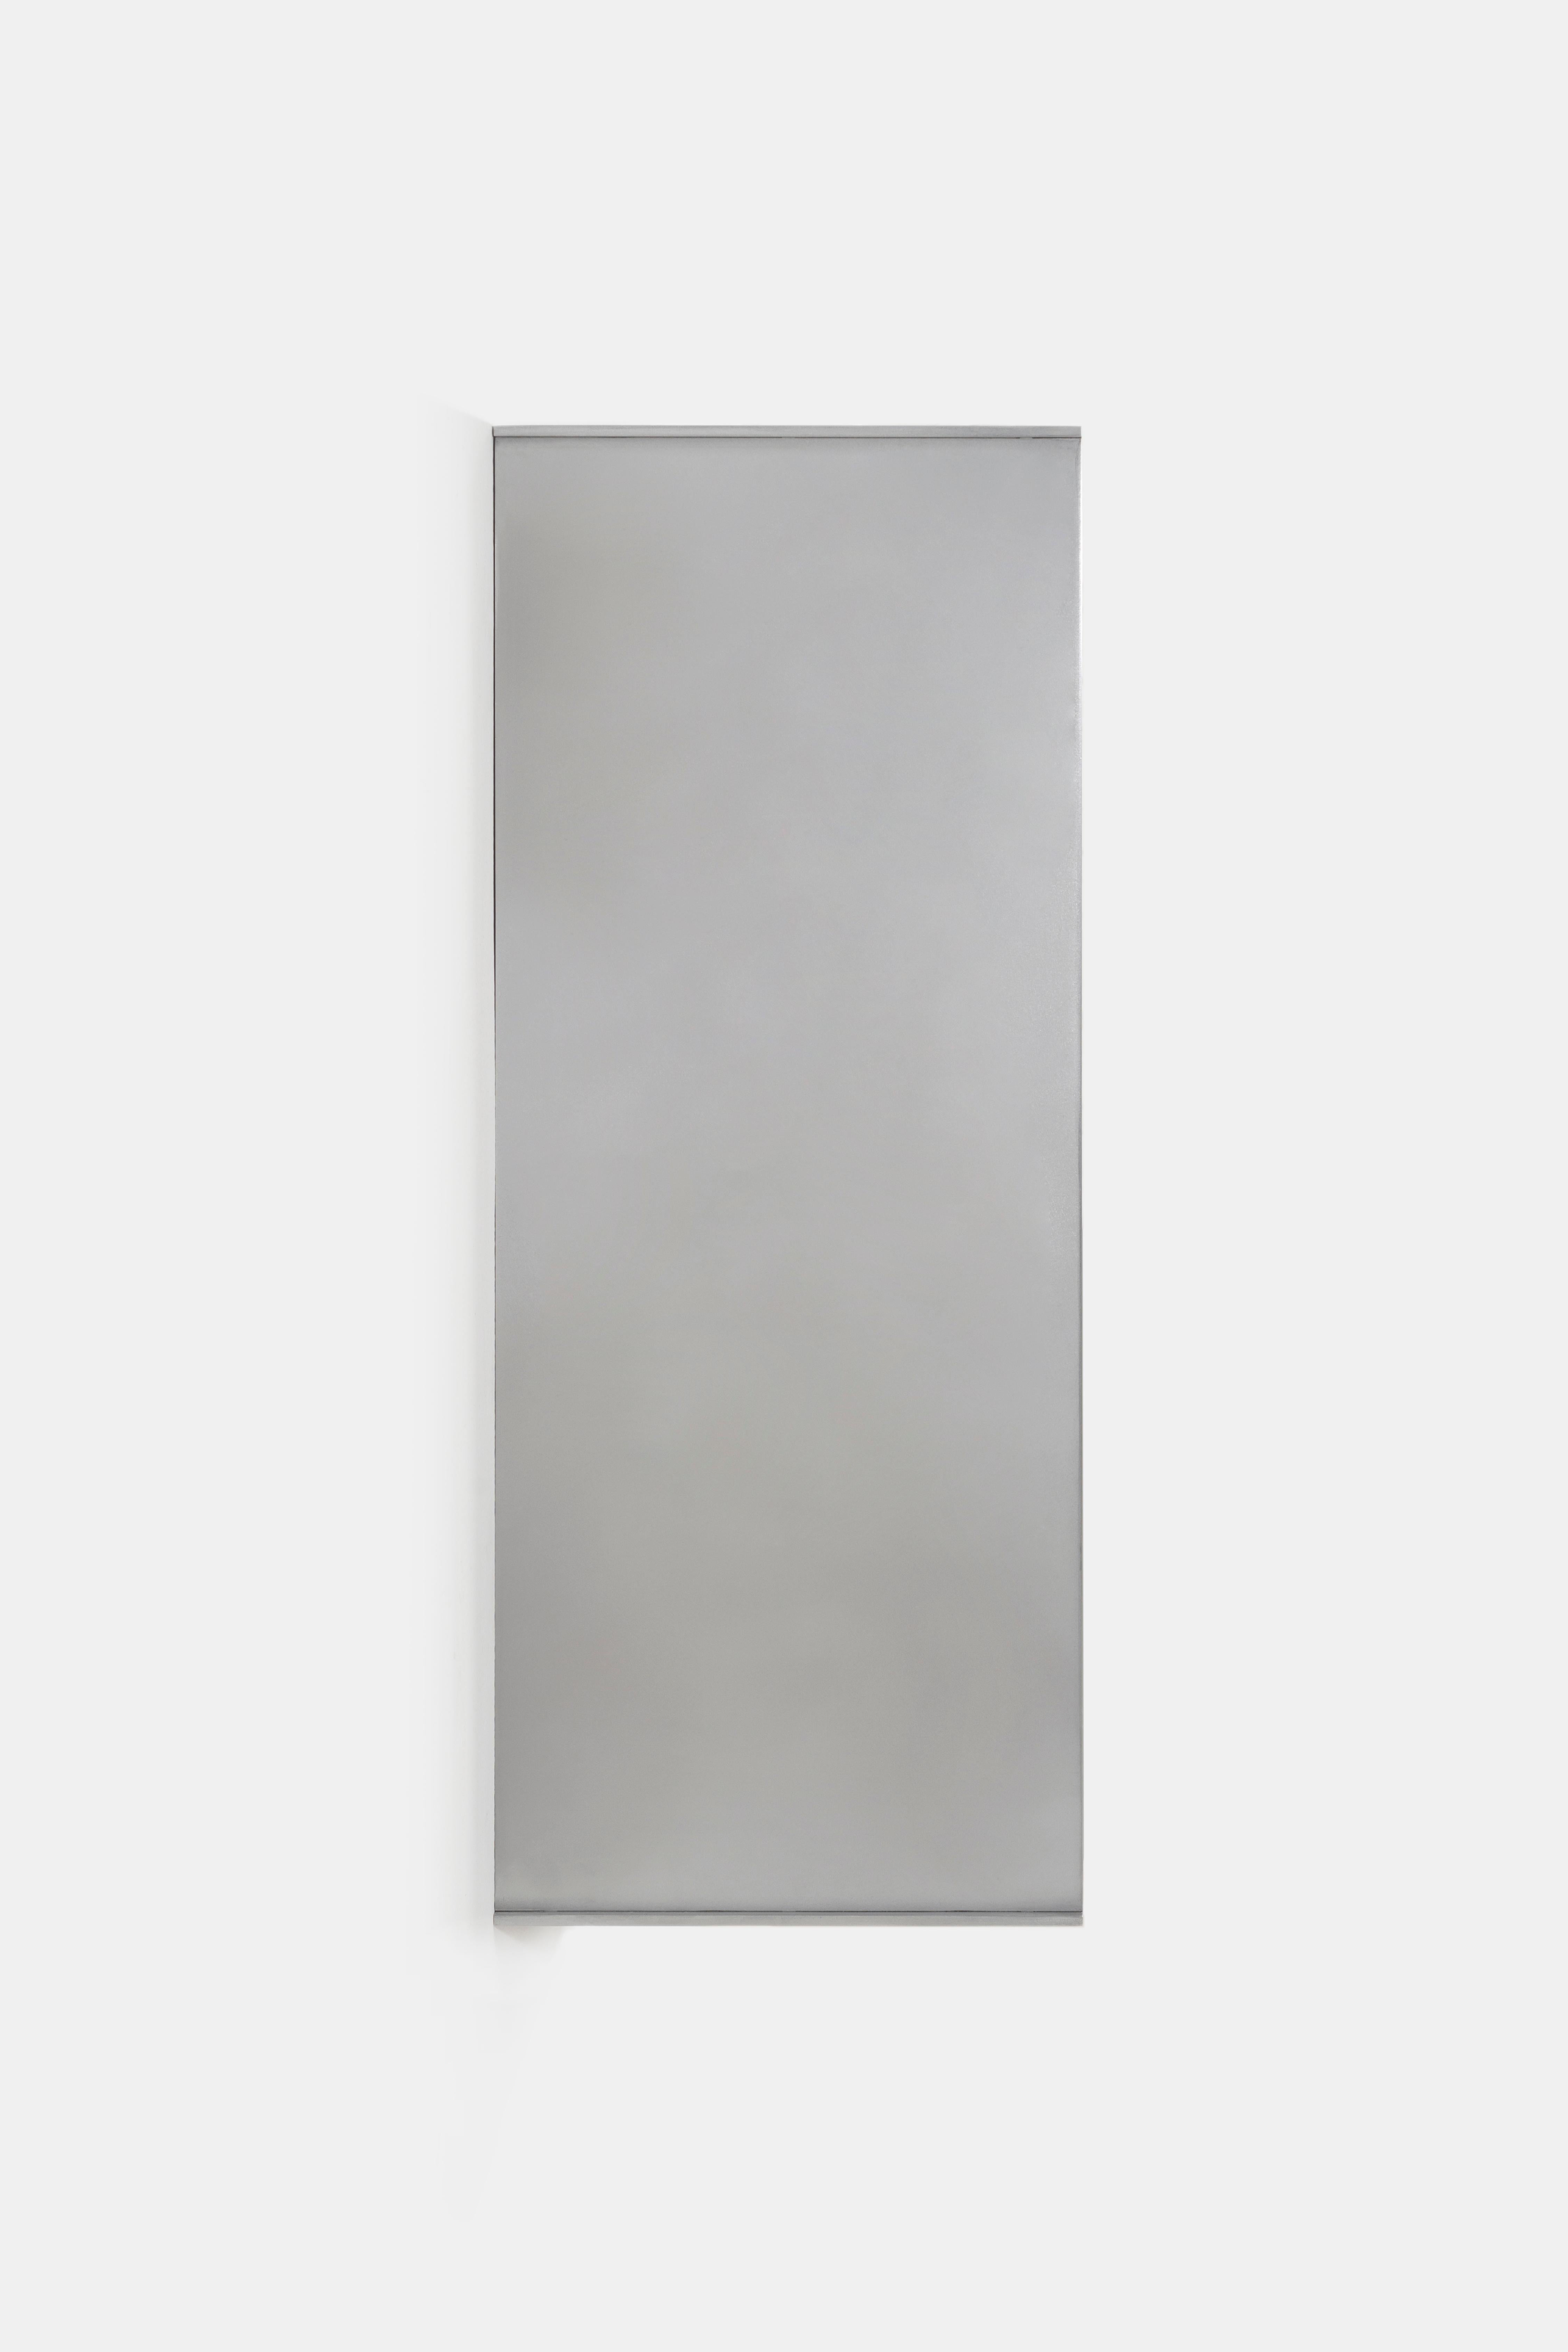 SC Wall-Mounted Cabinet by Jonathan Nesci in Cut, Machined and Waxed Aluminum For Sale 1